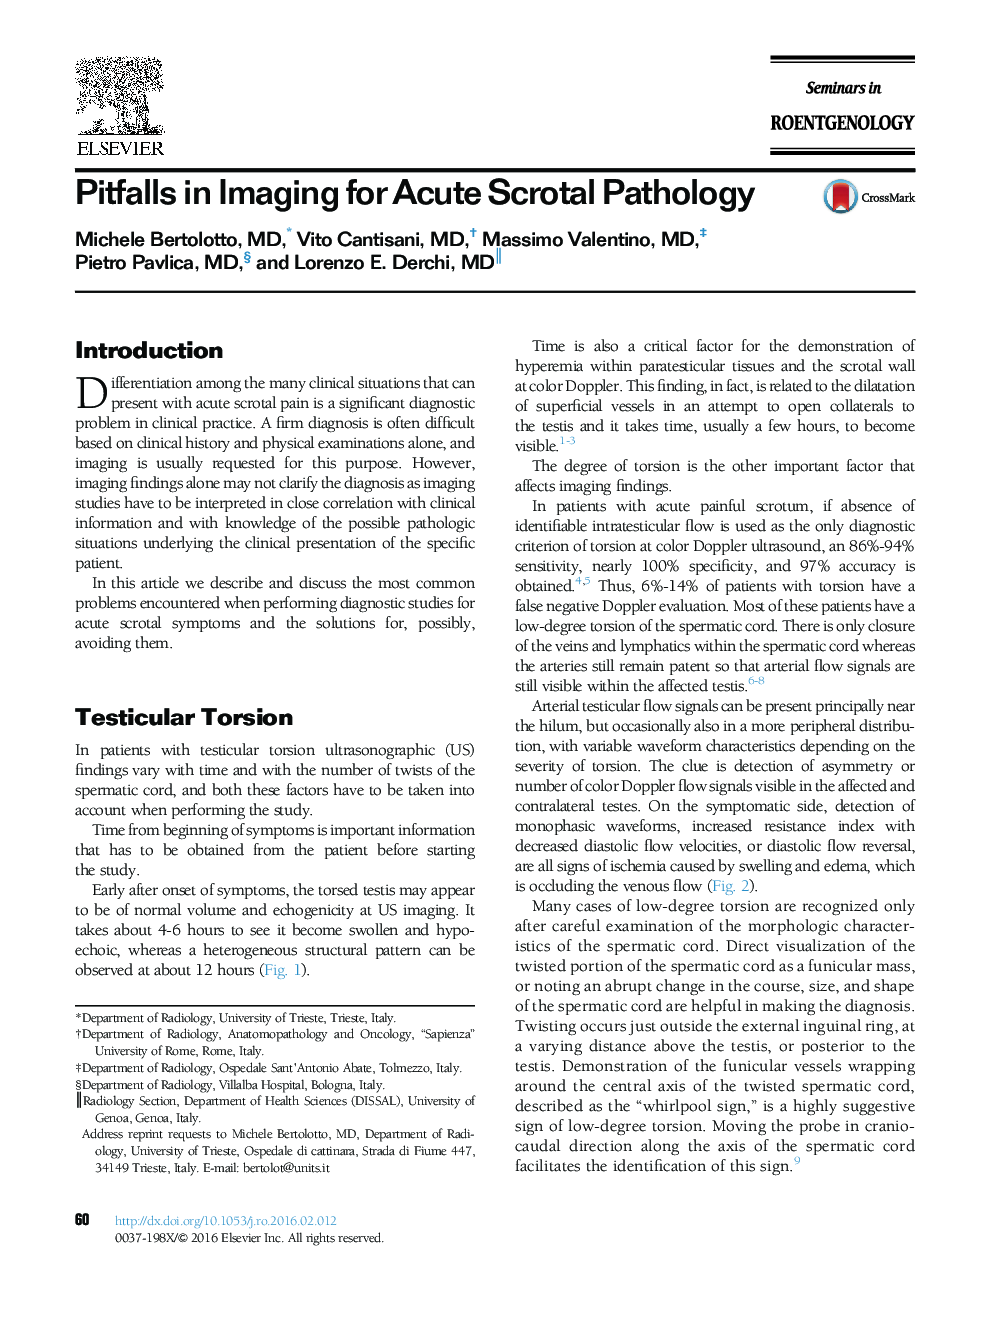 Pitfalls in Imaging for Acute Scrotal Pathology